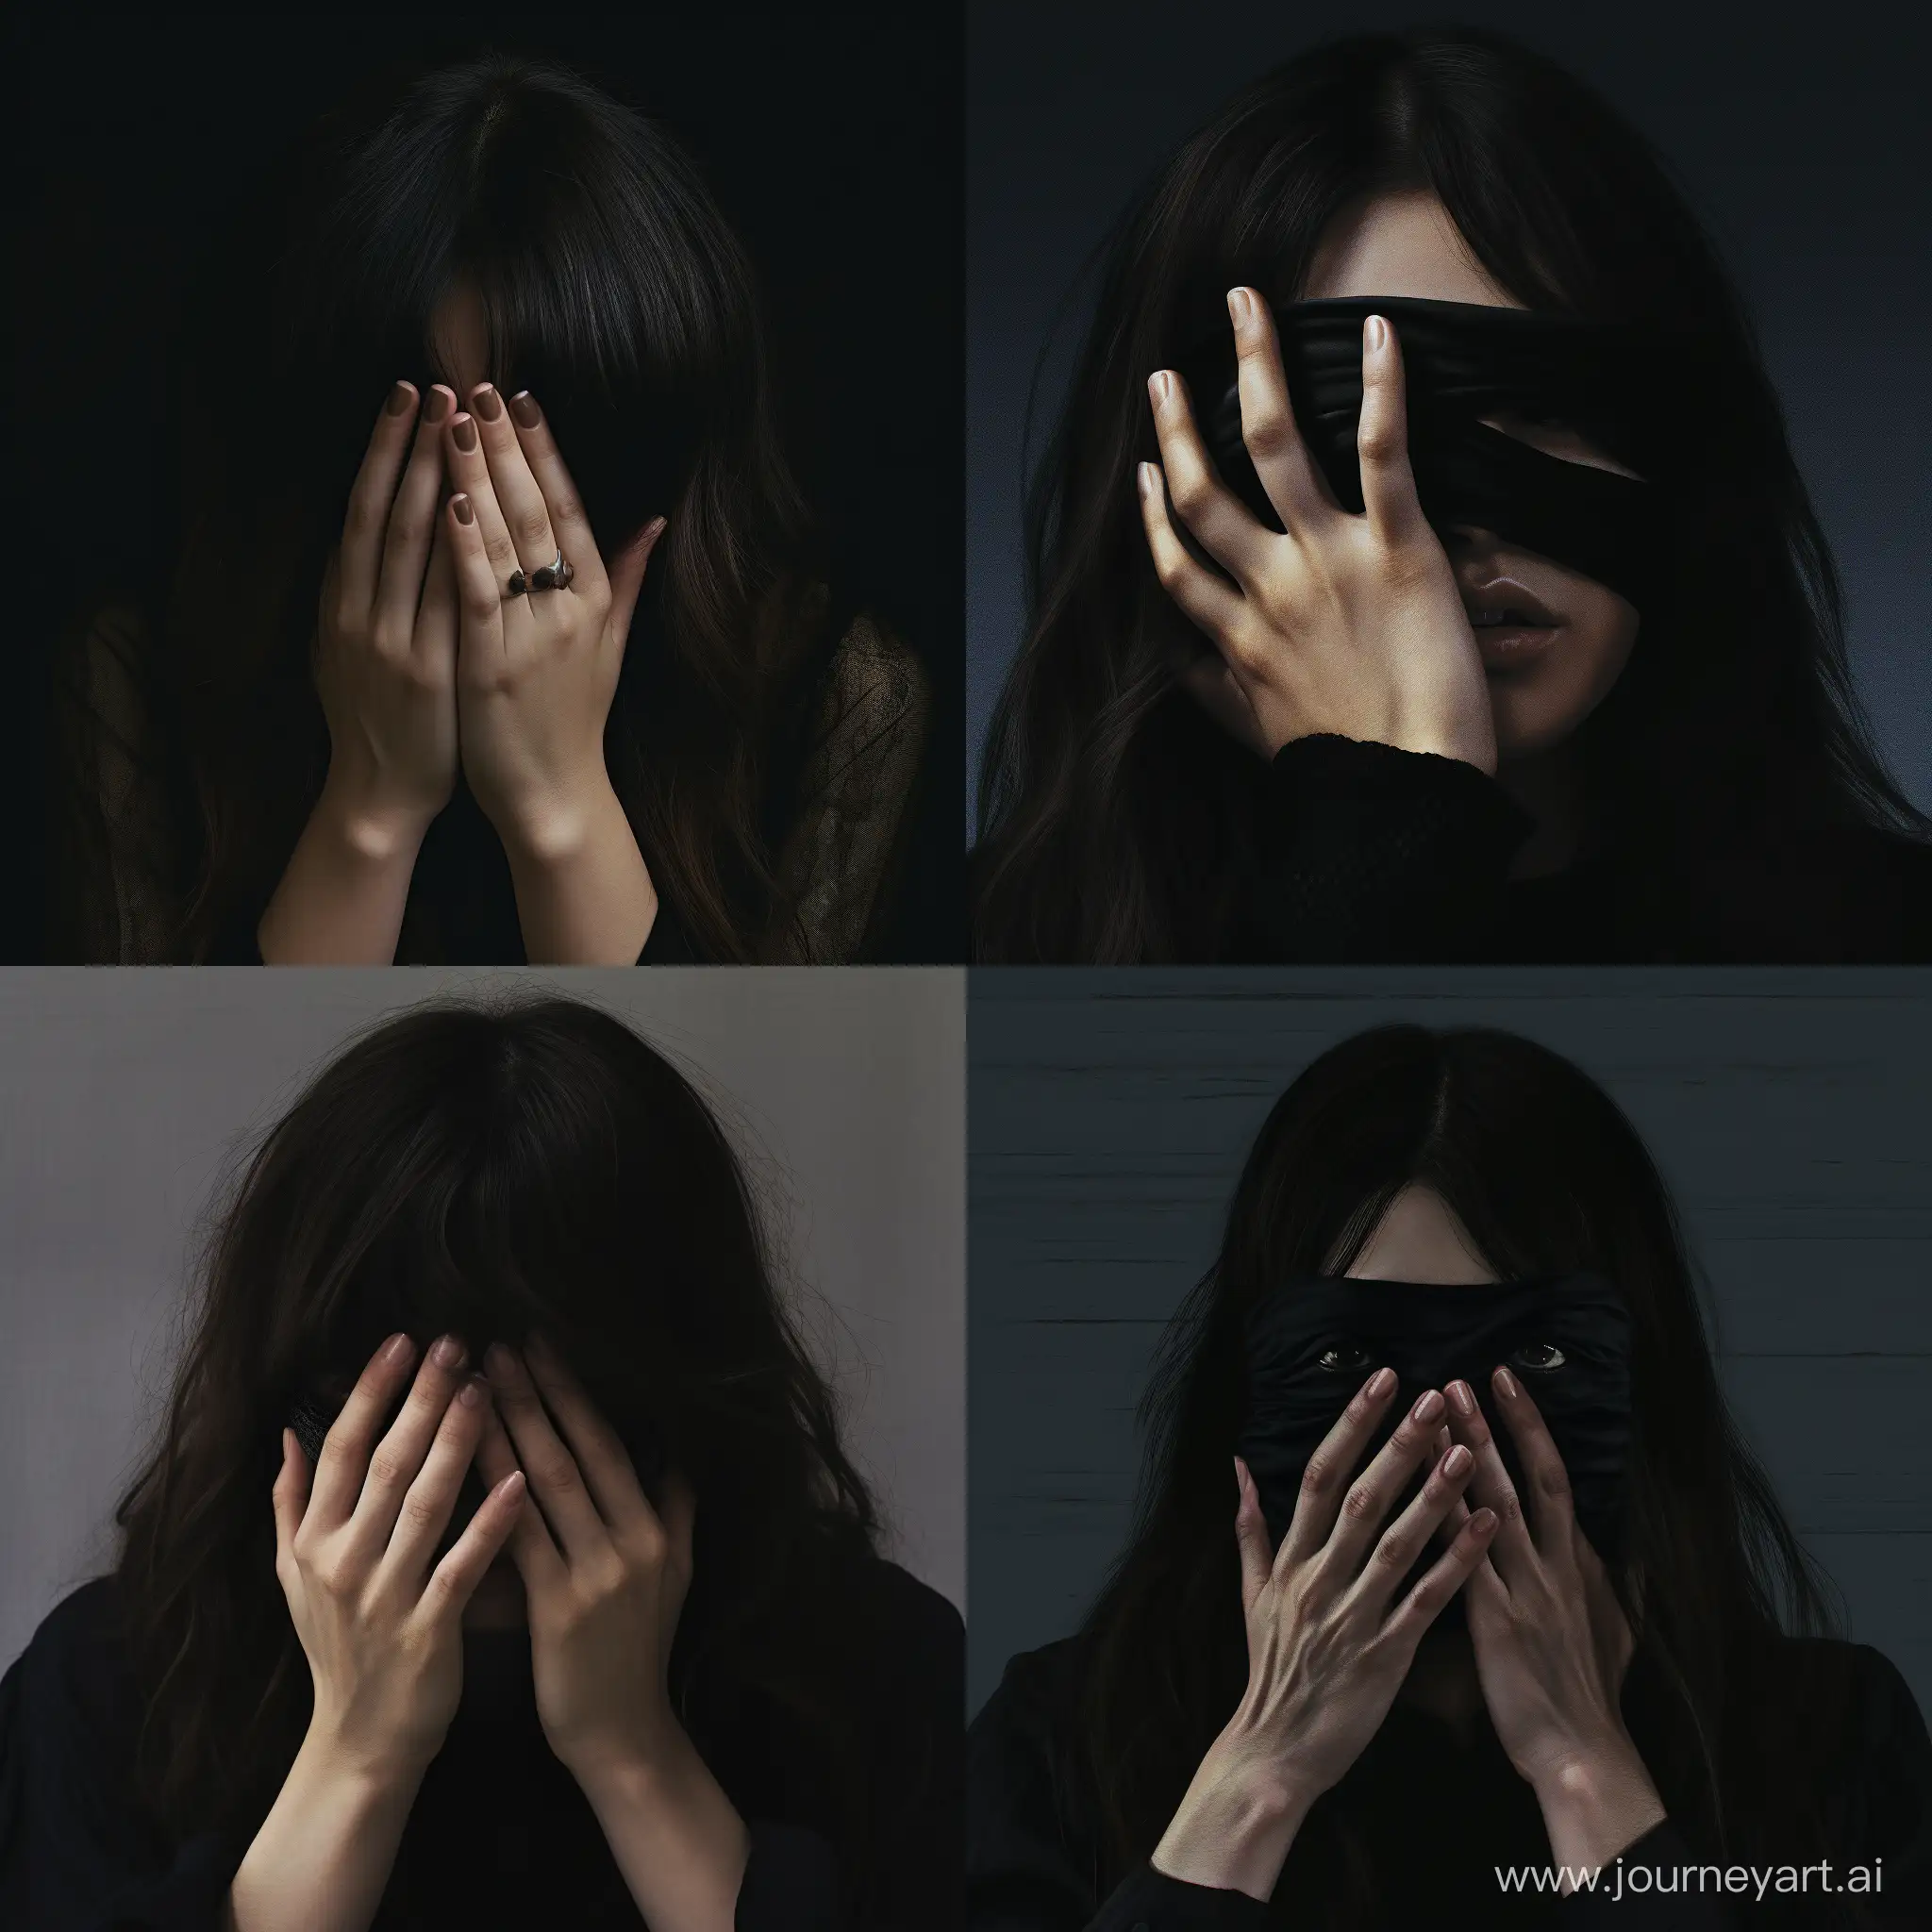 an album art type image of a woman covering her eyes with her hand wearing a black ring and long hair